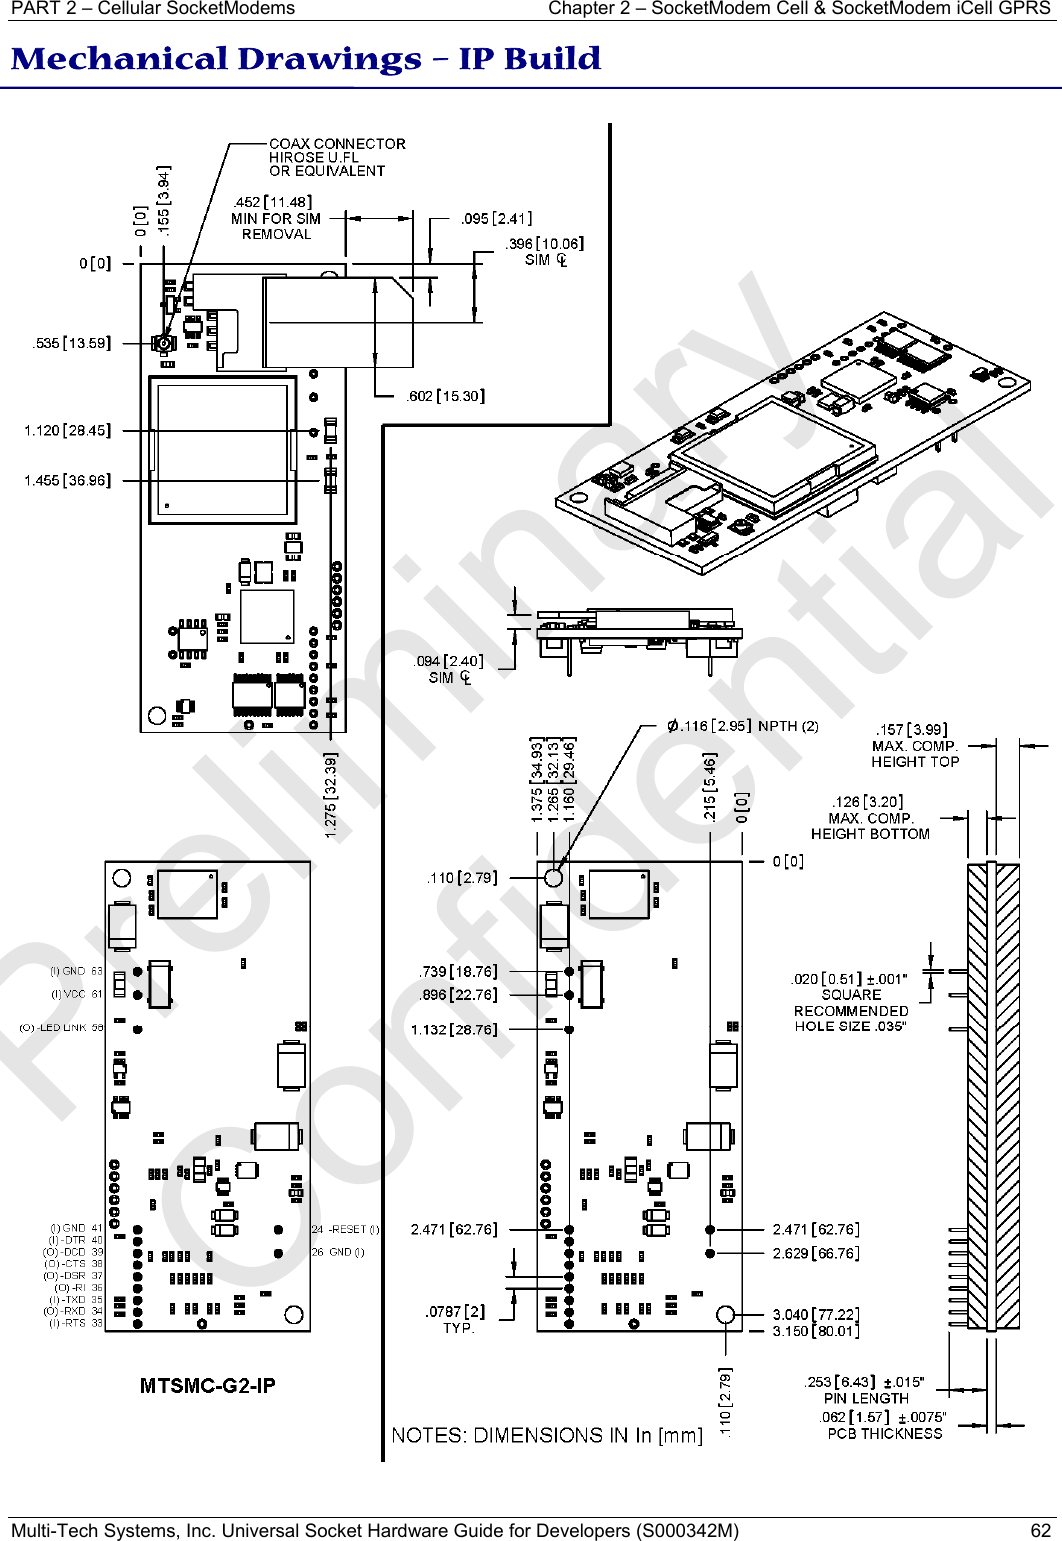 PART 2 – Cellular SocketModems   Chapter 2 – SocketModem Cell &amp; SocketModem iCell GPRS Multi-Tech Systems, Inc. Universal Socket Hardware Guide for Developers (S000342M)  62  Mechanical Drawings – IP Build Preliminary  Confidential